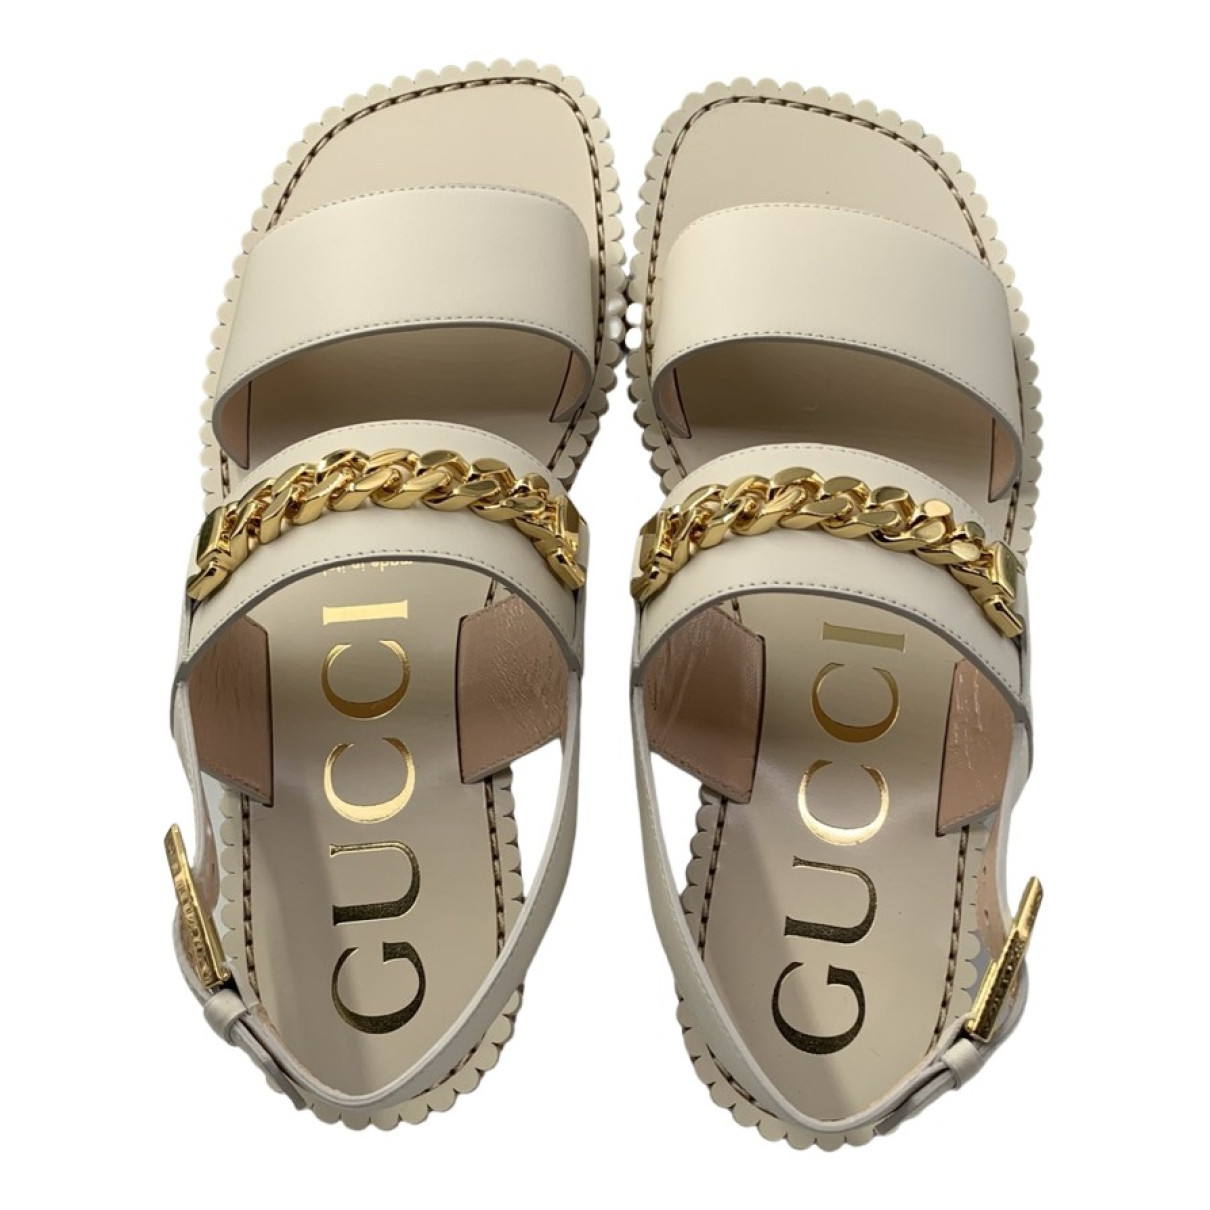 shoes Gucci sandals for Female Leather 38 EU. Used condition